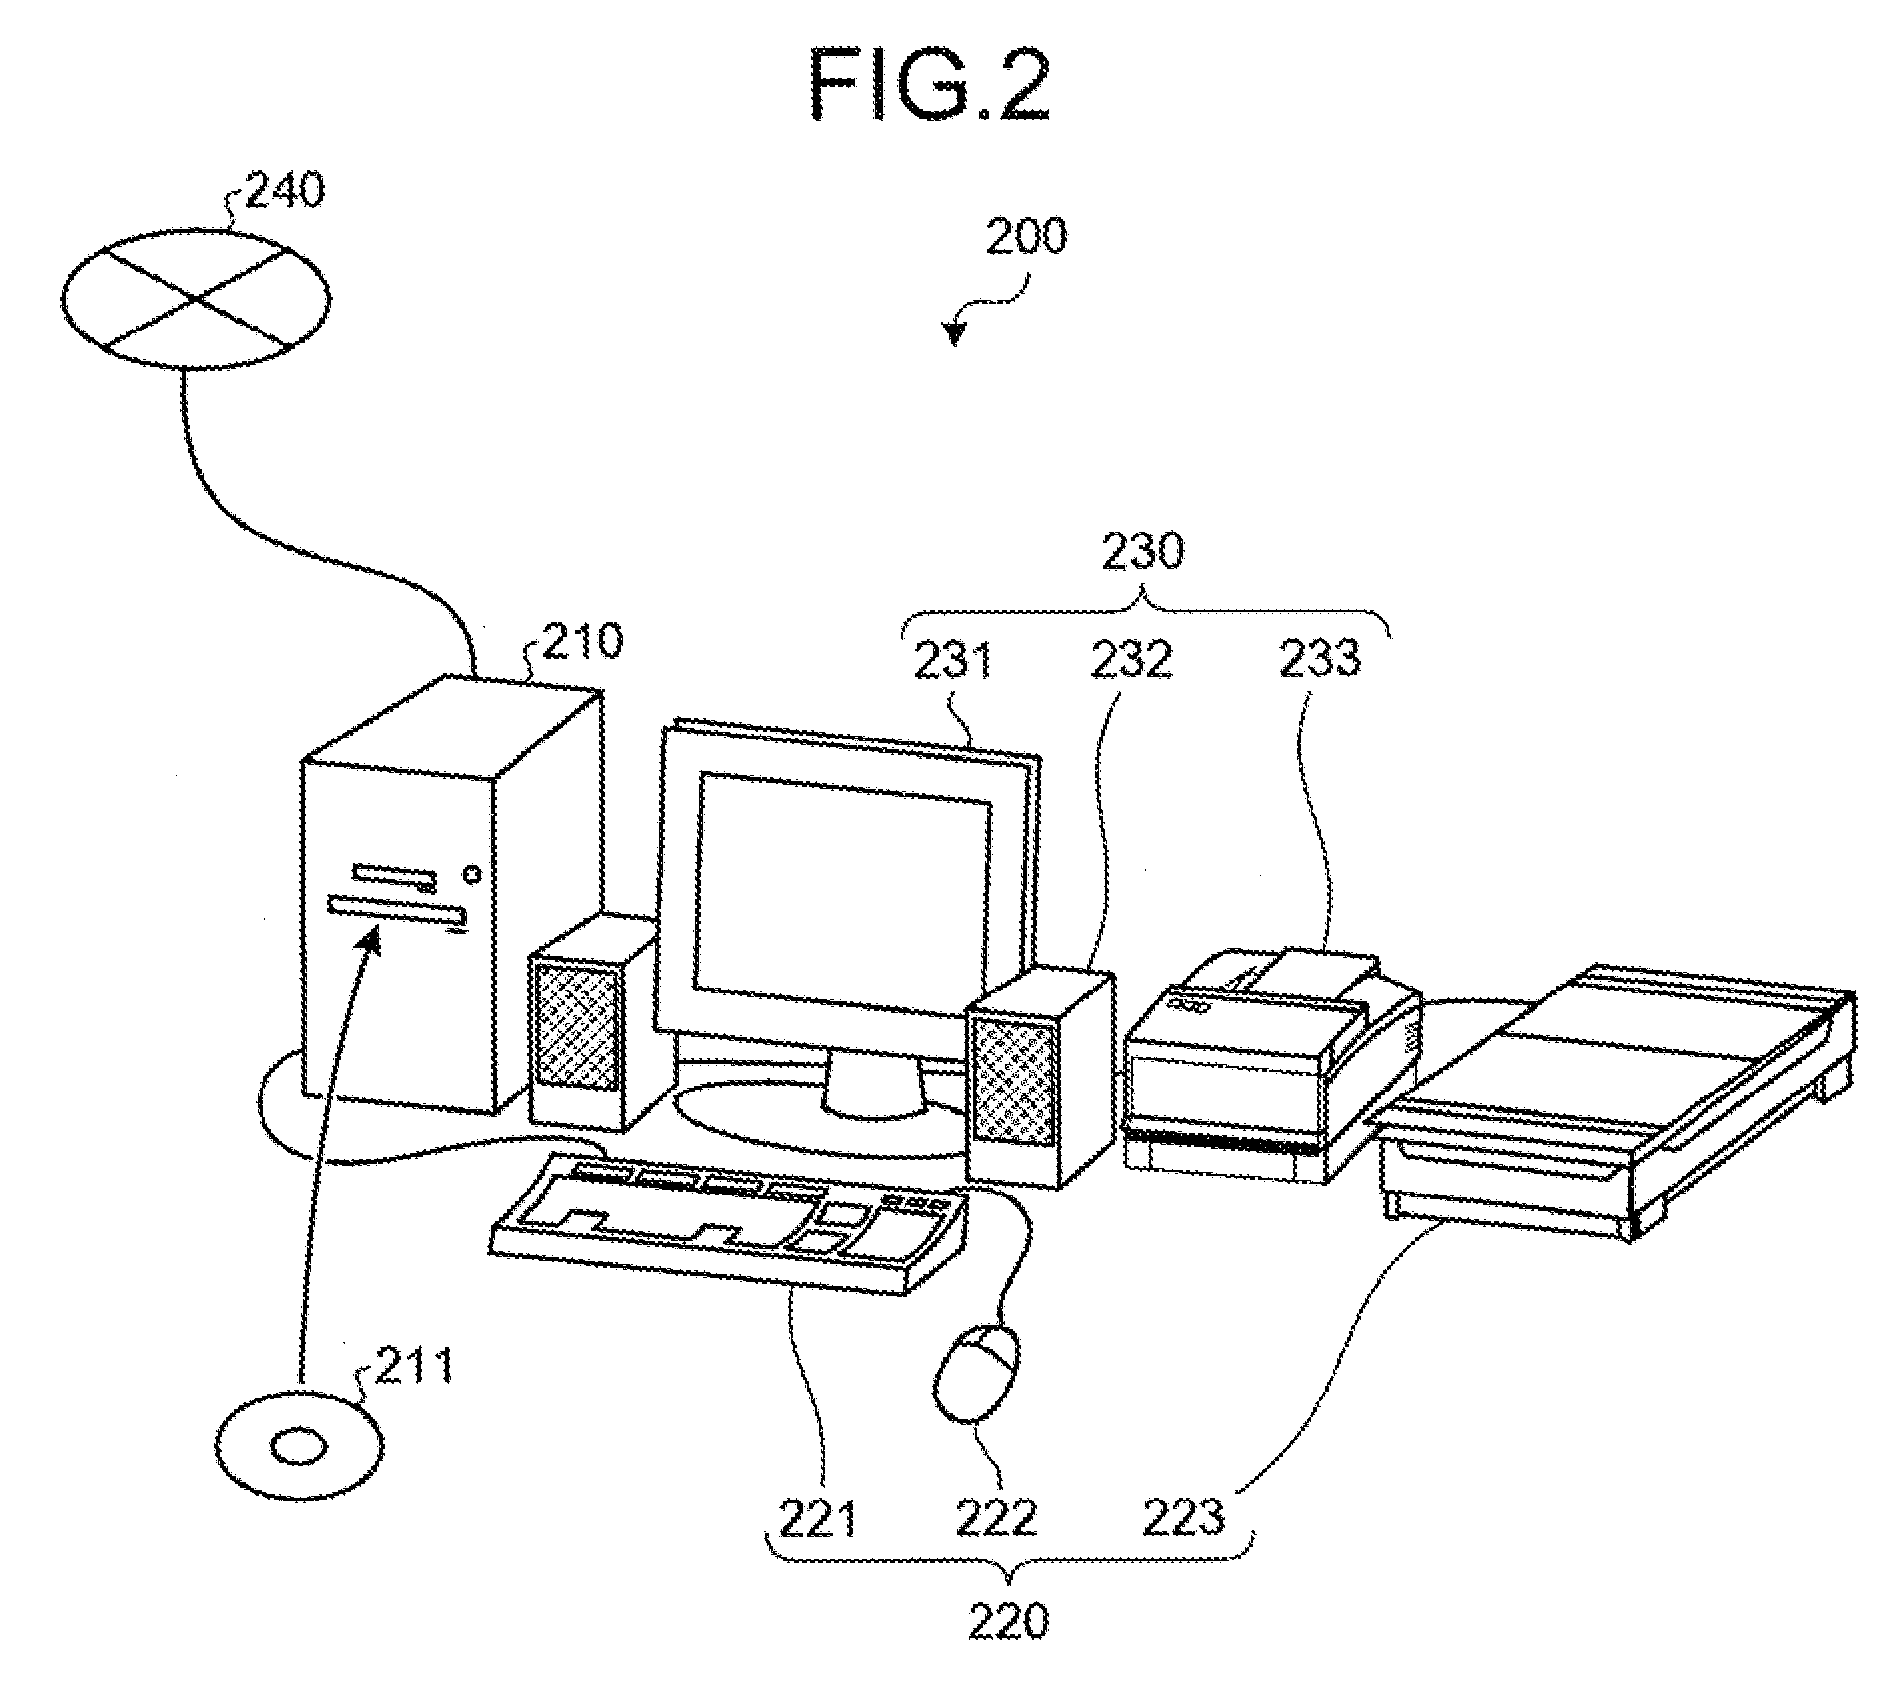 Power index computing apparatus, method of computing power index, and computer product